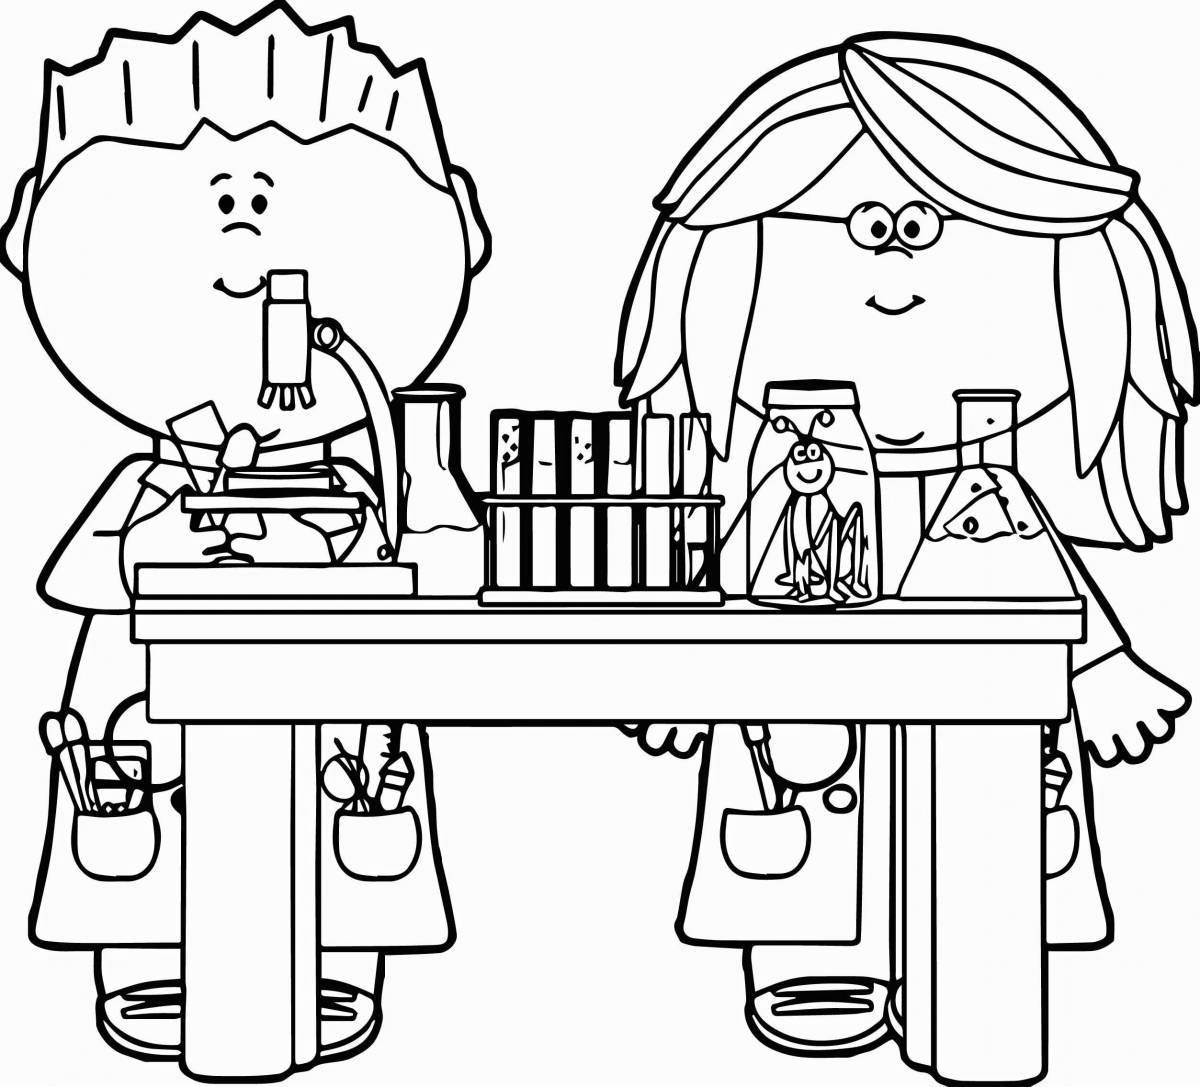 Stimulating chemical coloring book for kids